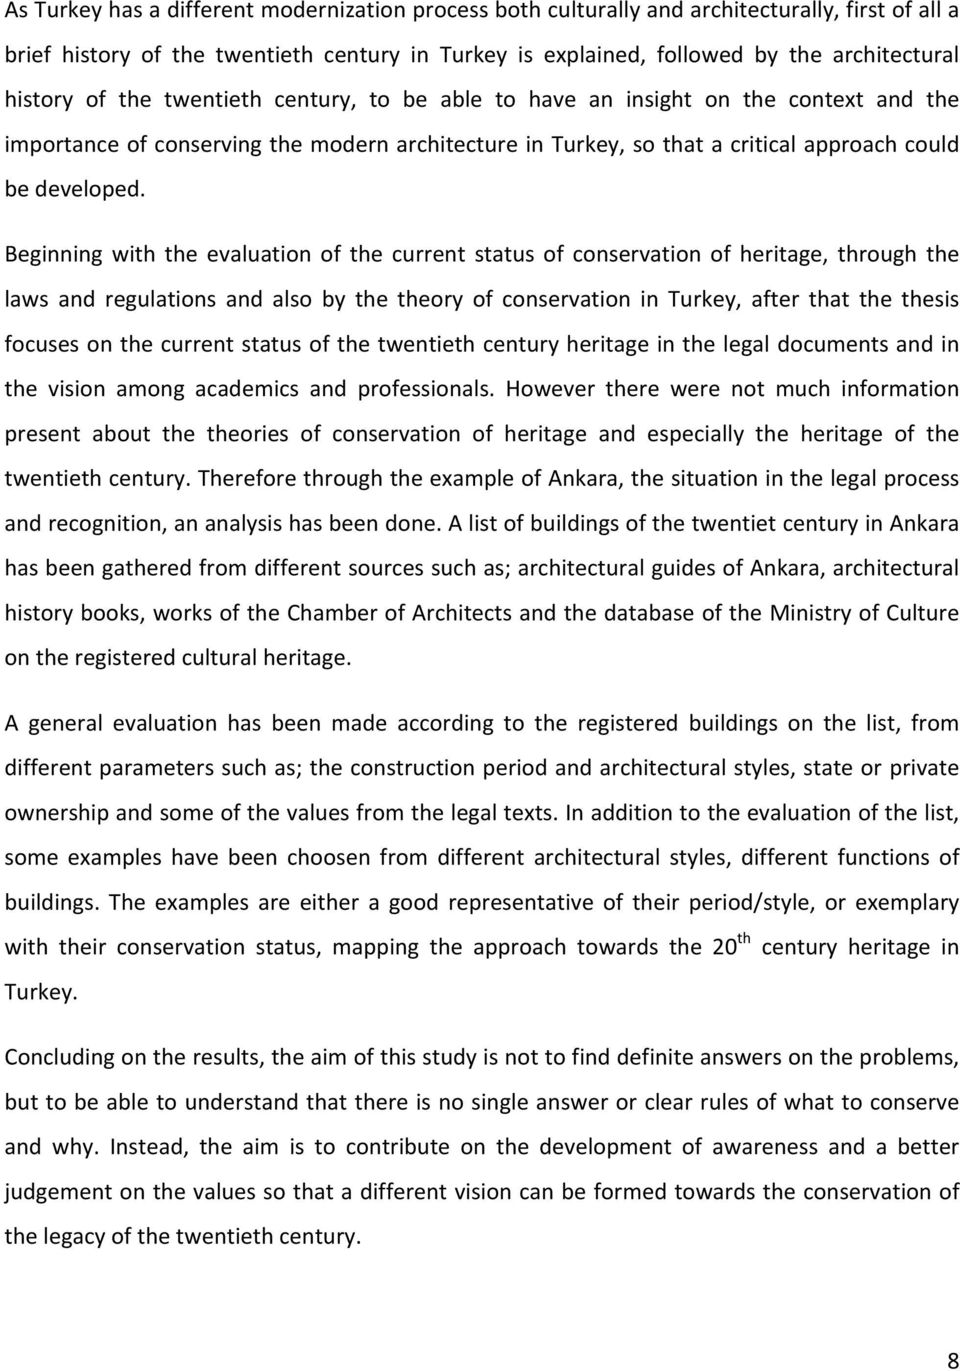 Beginning with the evaluation of the current status of conservation of heritage, through the laws and regulations and also by the theory of conservation in Turkey, after that the thesis focuses on